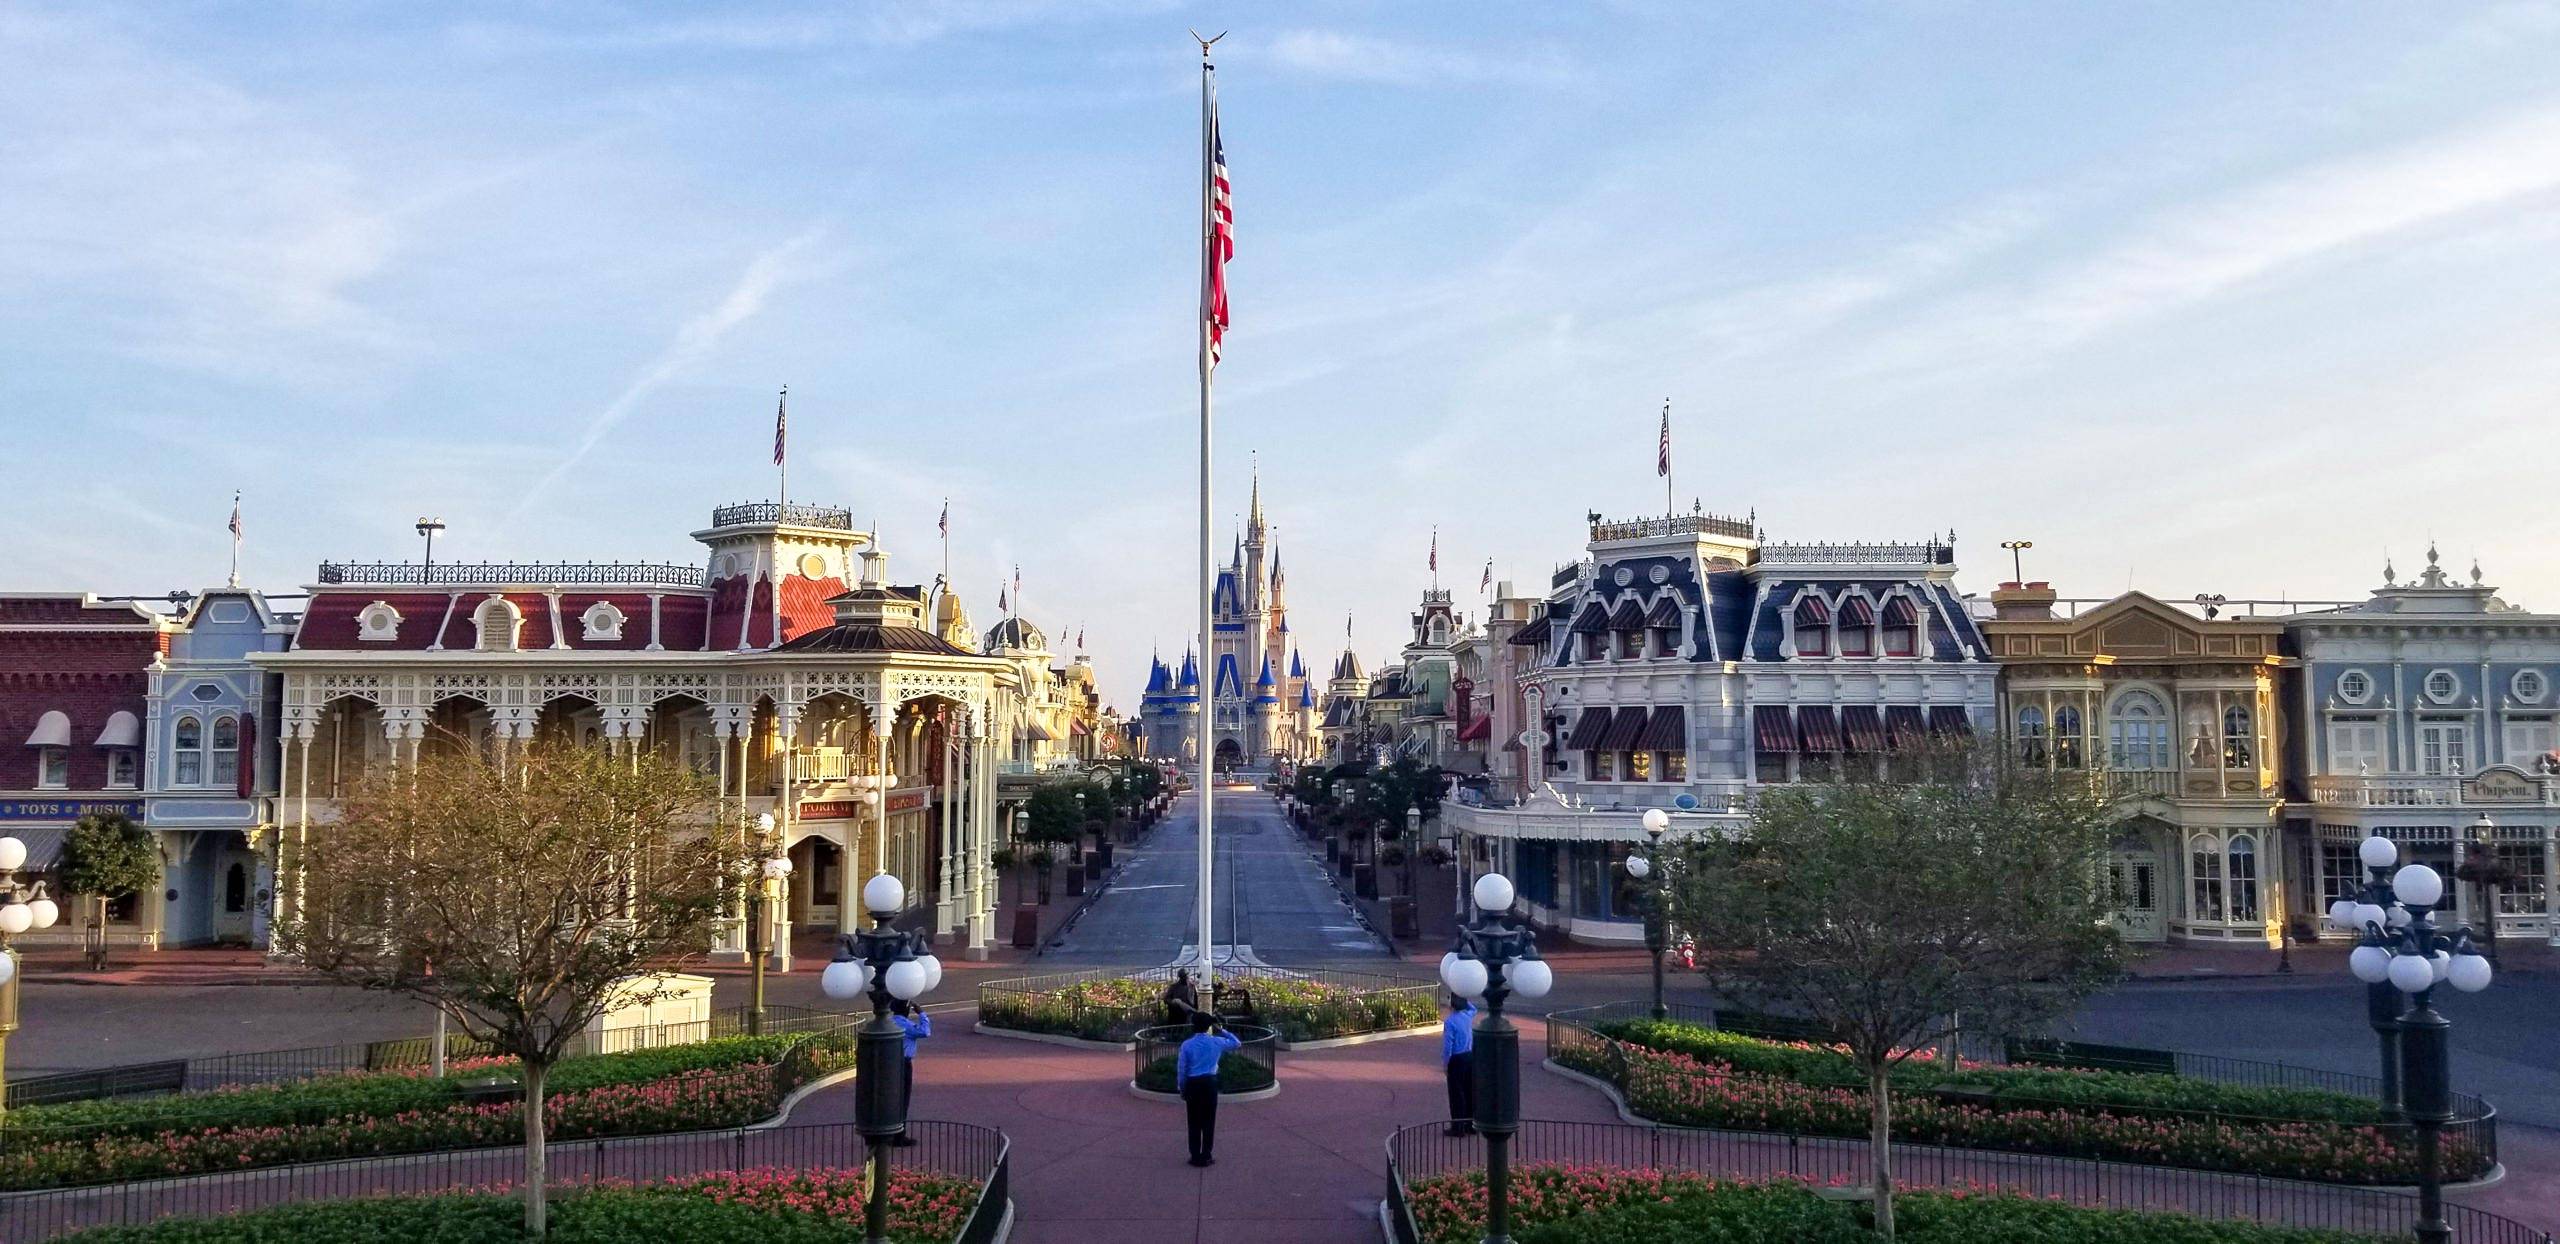 VIDEO - Disney Security Cast Members continue to raise the flag each and every morning at Magic Kingdom during the park's coronavirus closure